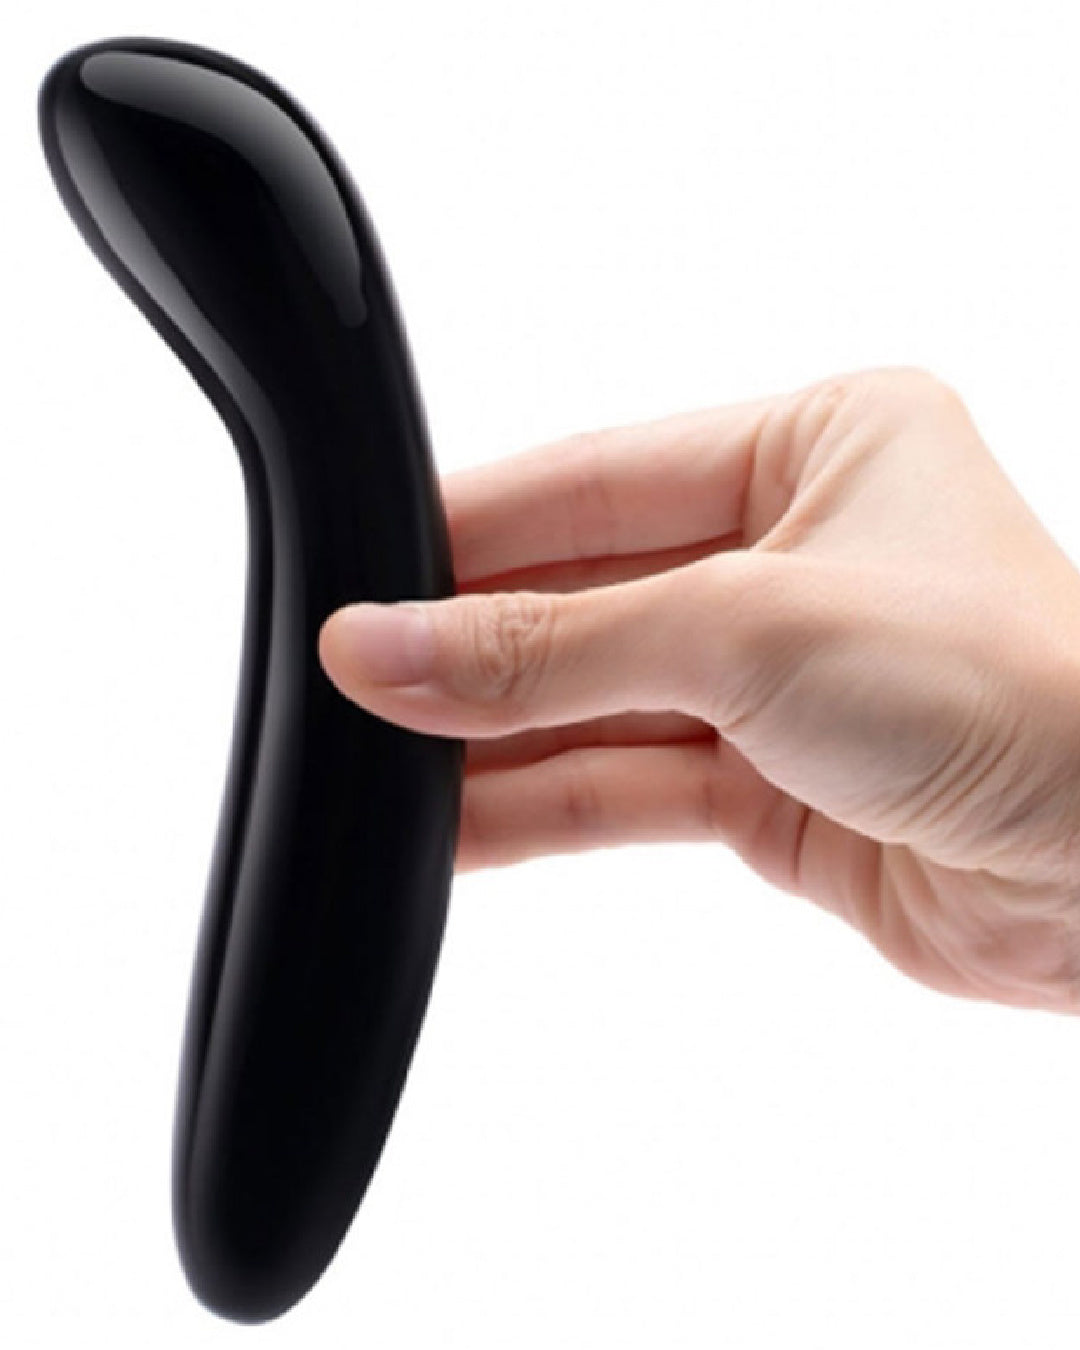 Le Wand Crystal G Spot Wand - Black Obsidian  held in model's hand 